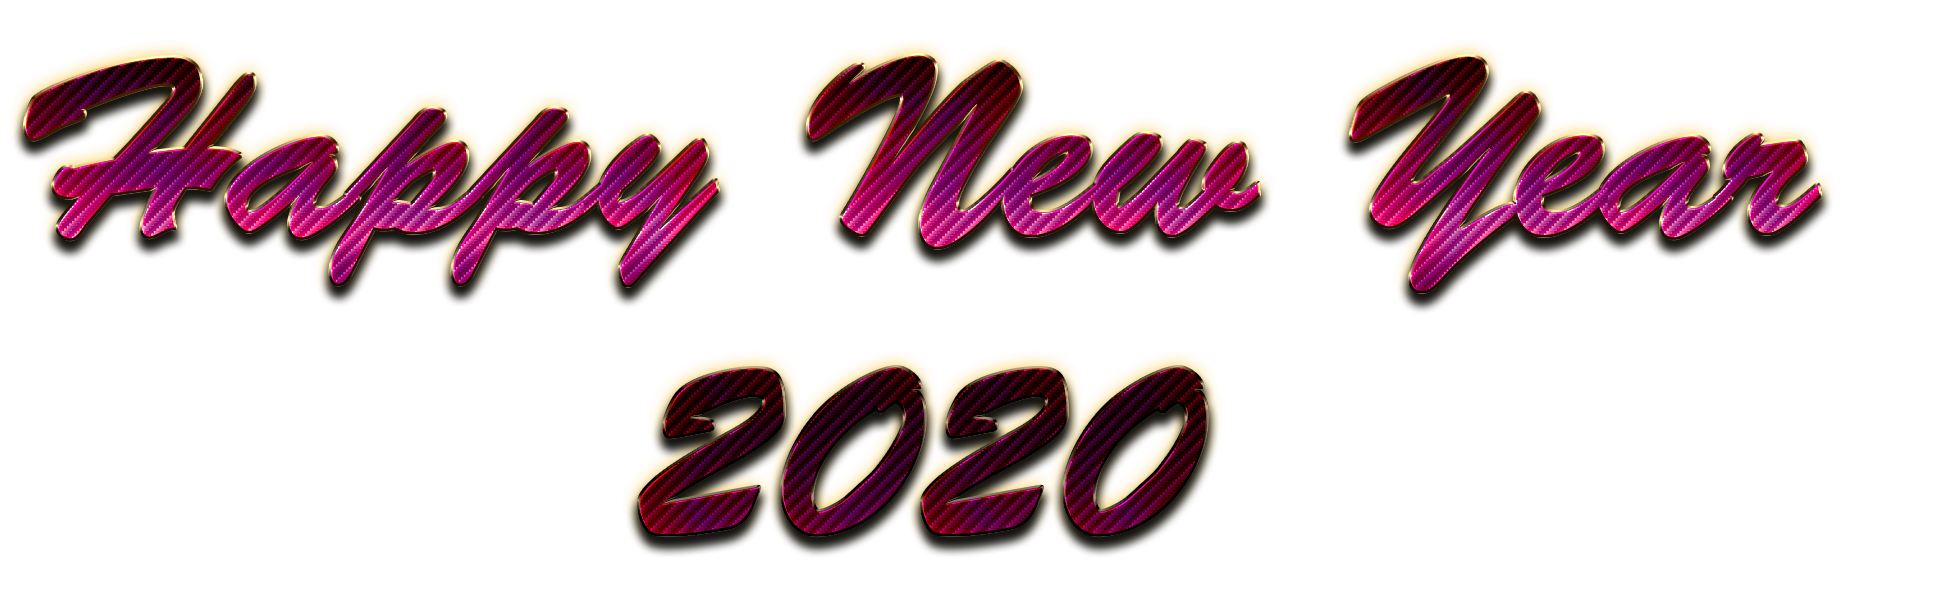 Happy New Year 2020 PNG Image Background